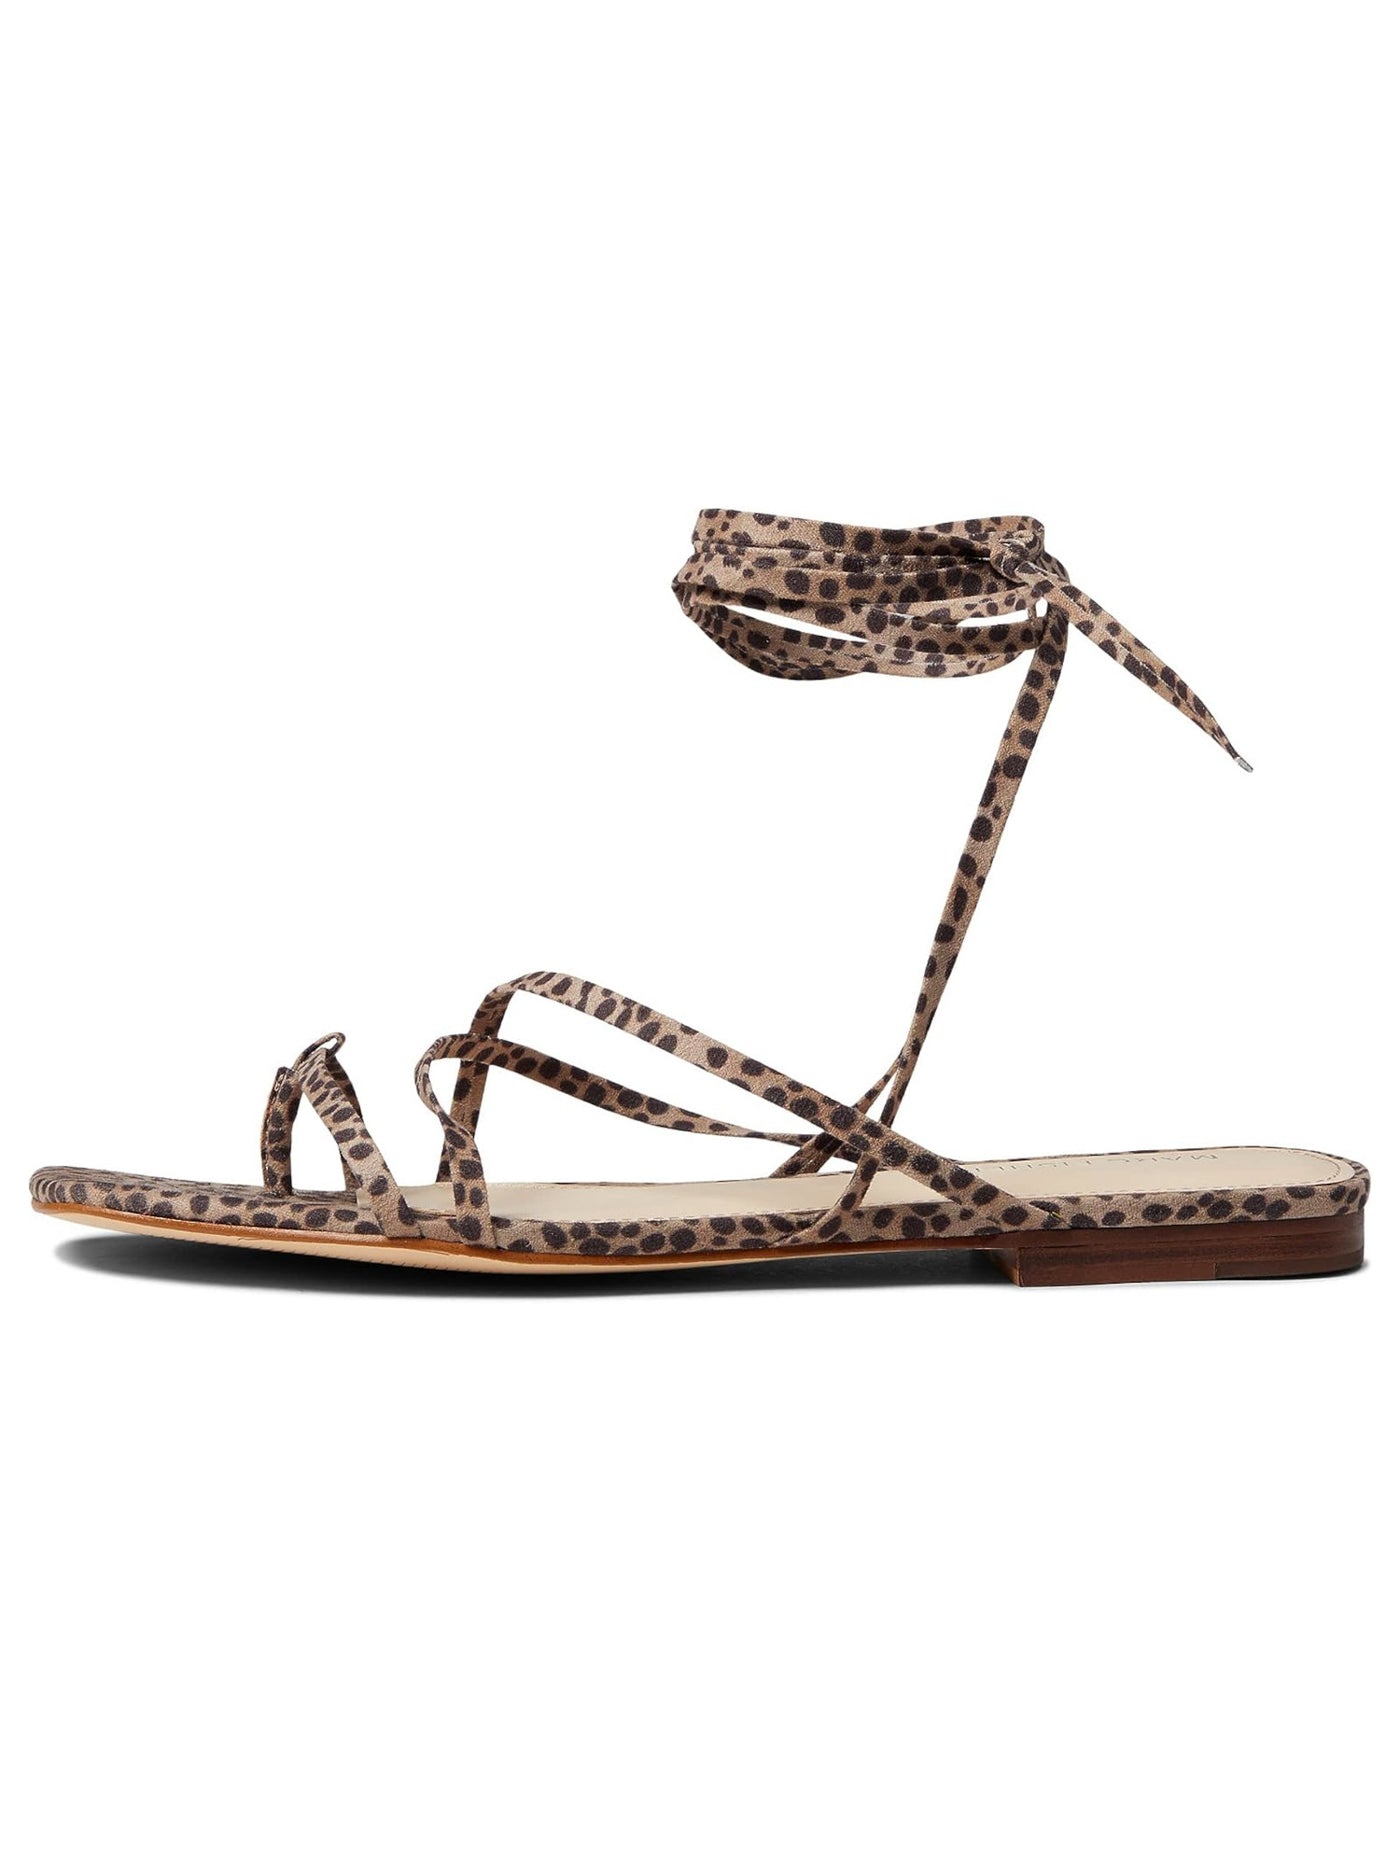 MARC FISHER Womens Brown Animal Print Thong Toe Padded Ankle Strap Strappy Latent Square Toe Block Heel Lace-Up Sandals Shoes 8.5 M